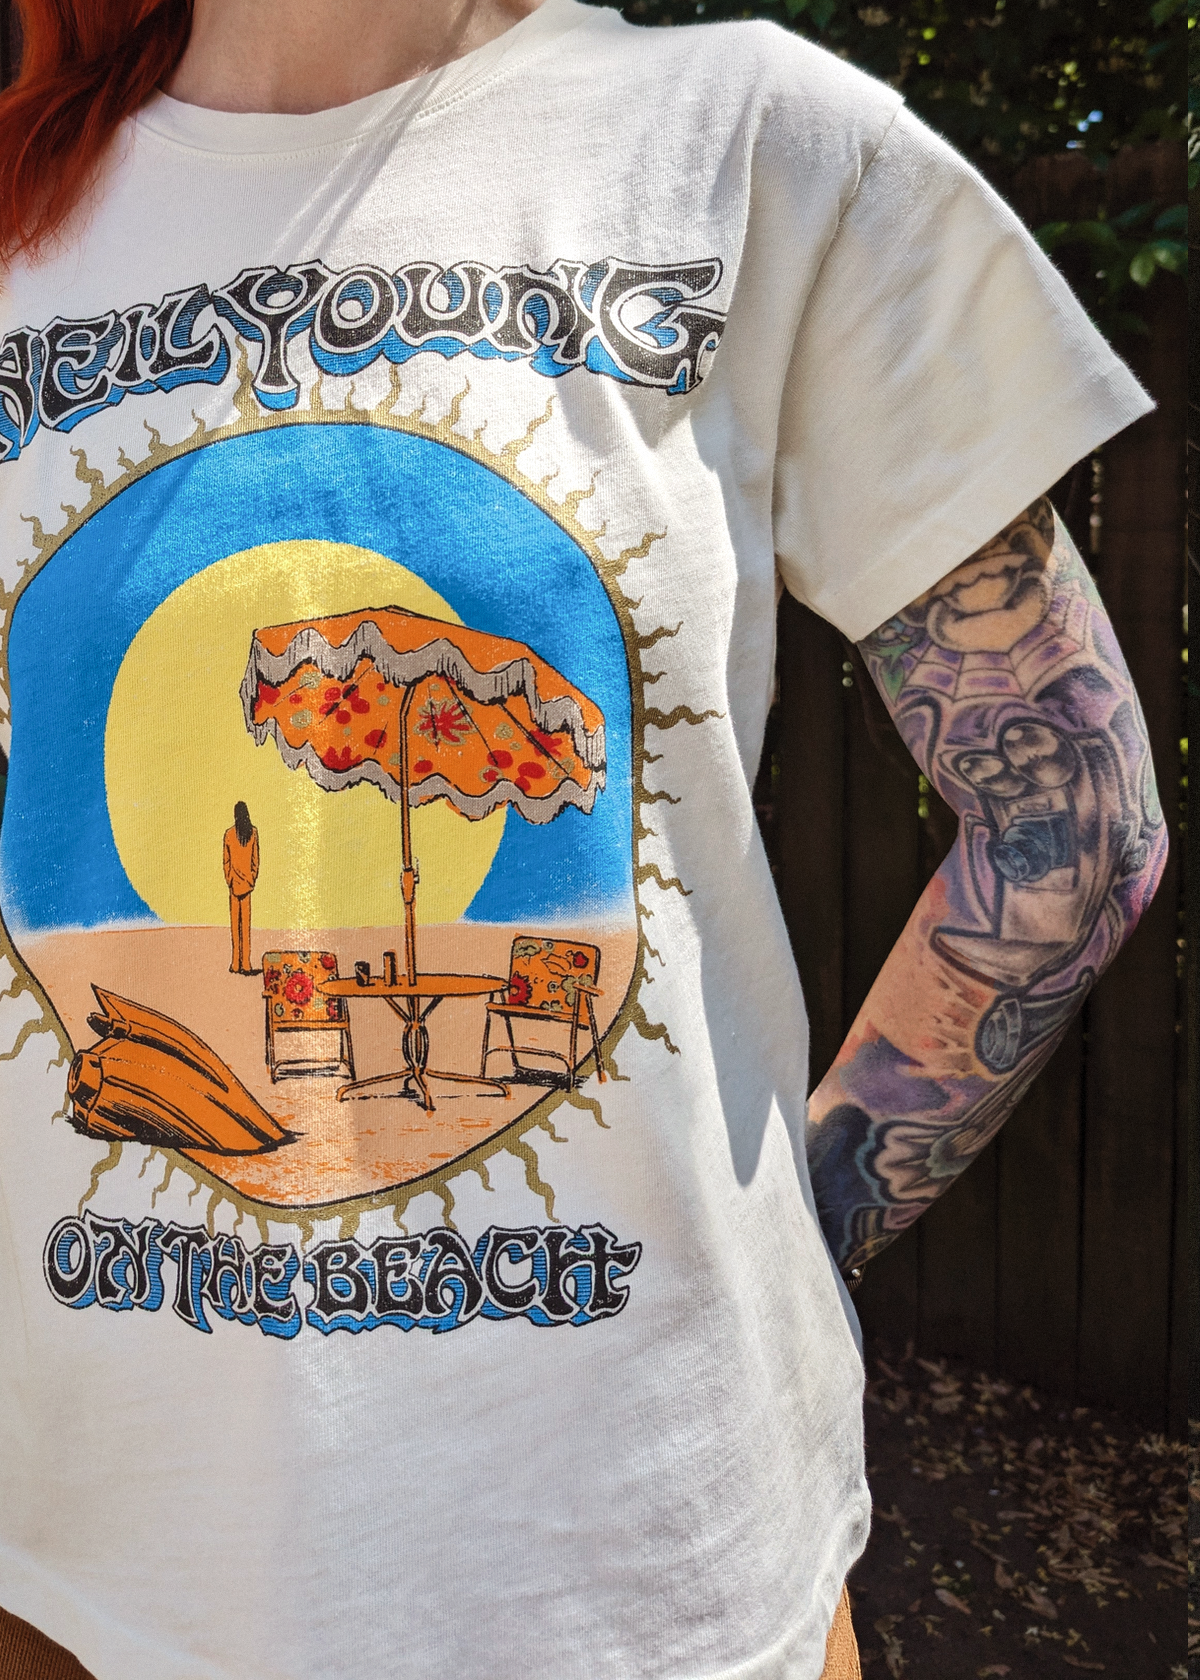 Neil Young On The Beach Tee by Daydreamer LA - made in California, USA, and officially licensed